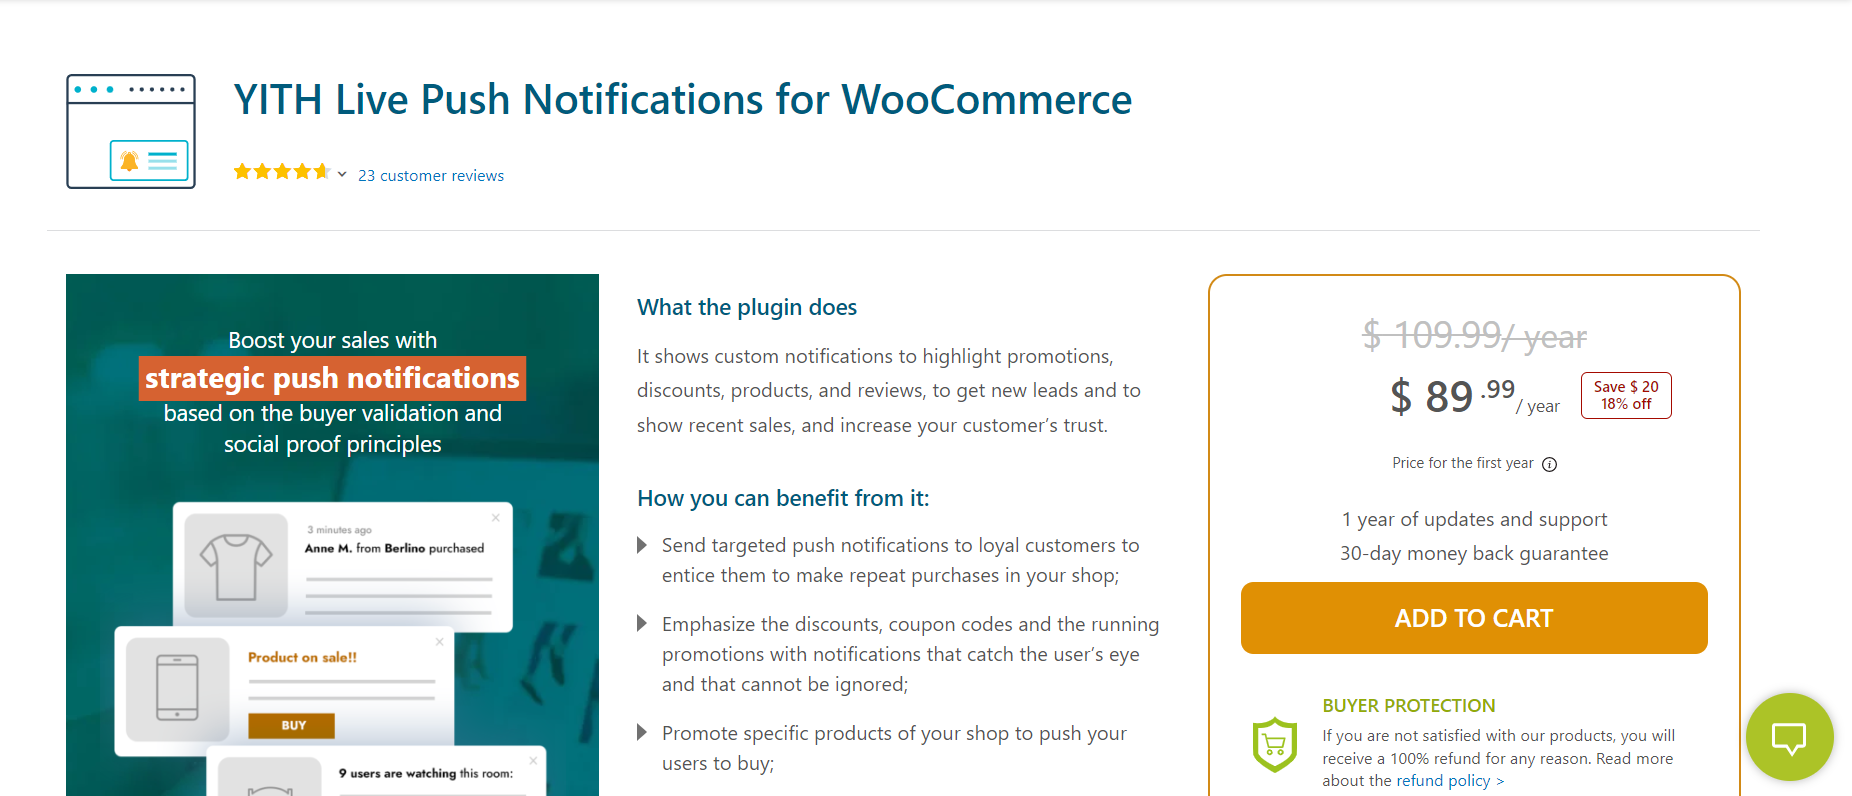 YITH Live Push Notifications for WooCommerce